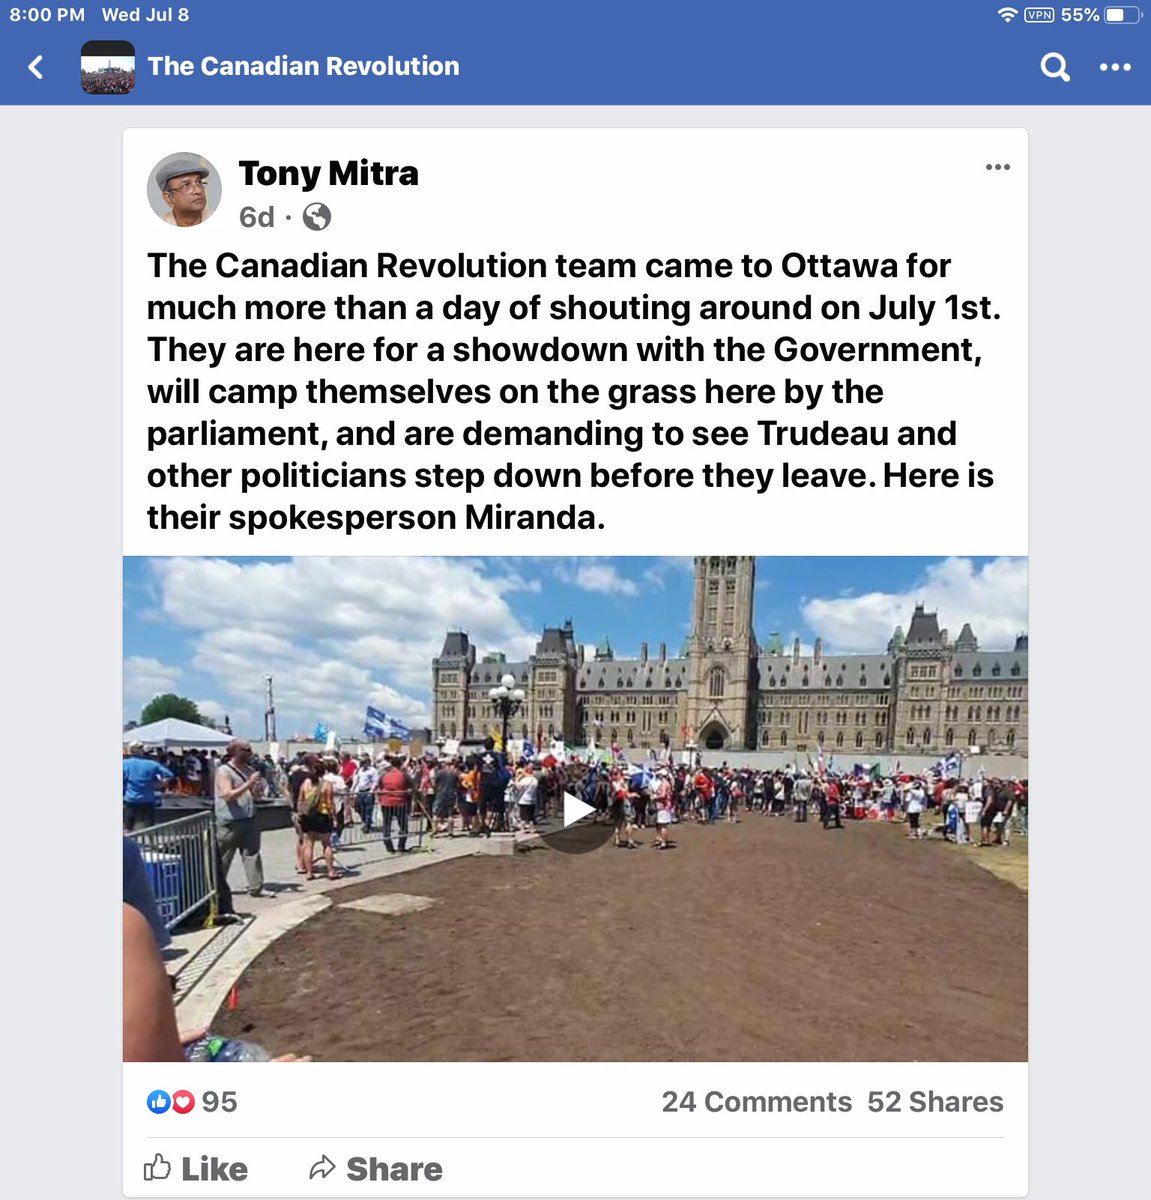 They are organized and demanding Trudeau step down. We know the attempted assassin was in Ottawa the day before he rammed the gate at Rideau Hall. Did he attend this protest?